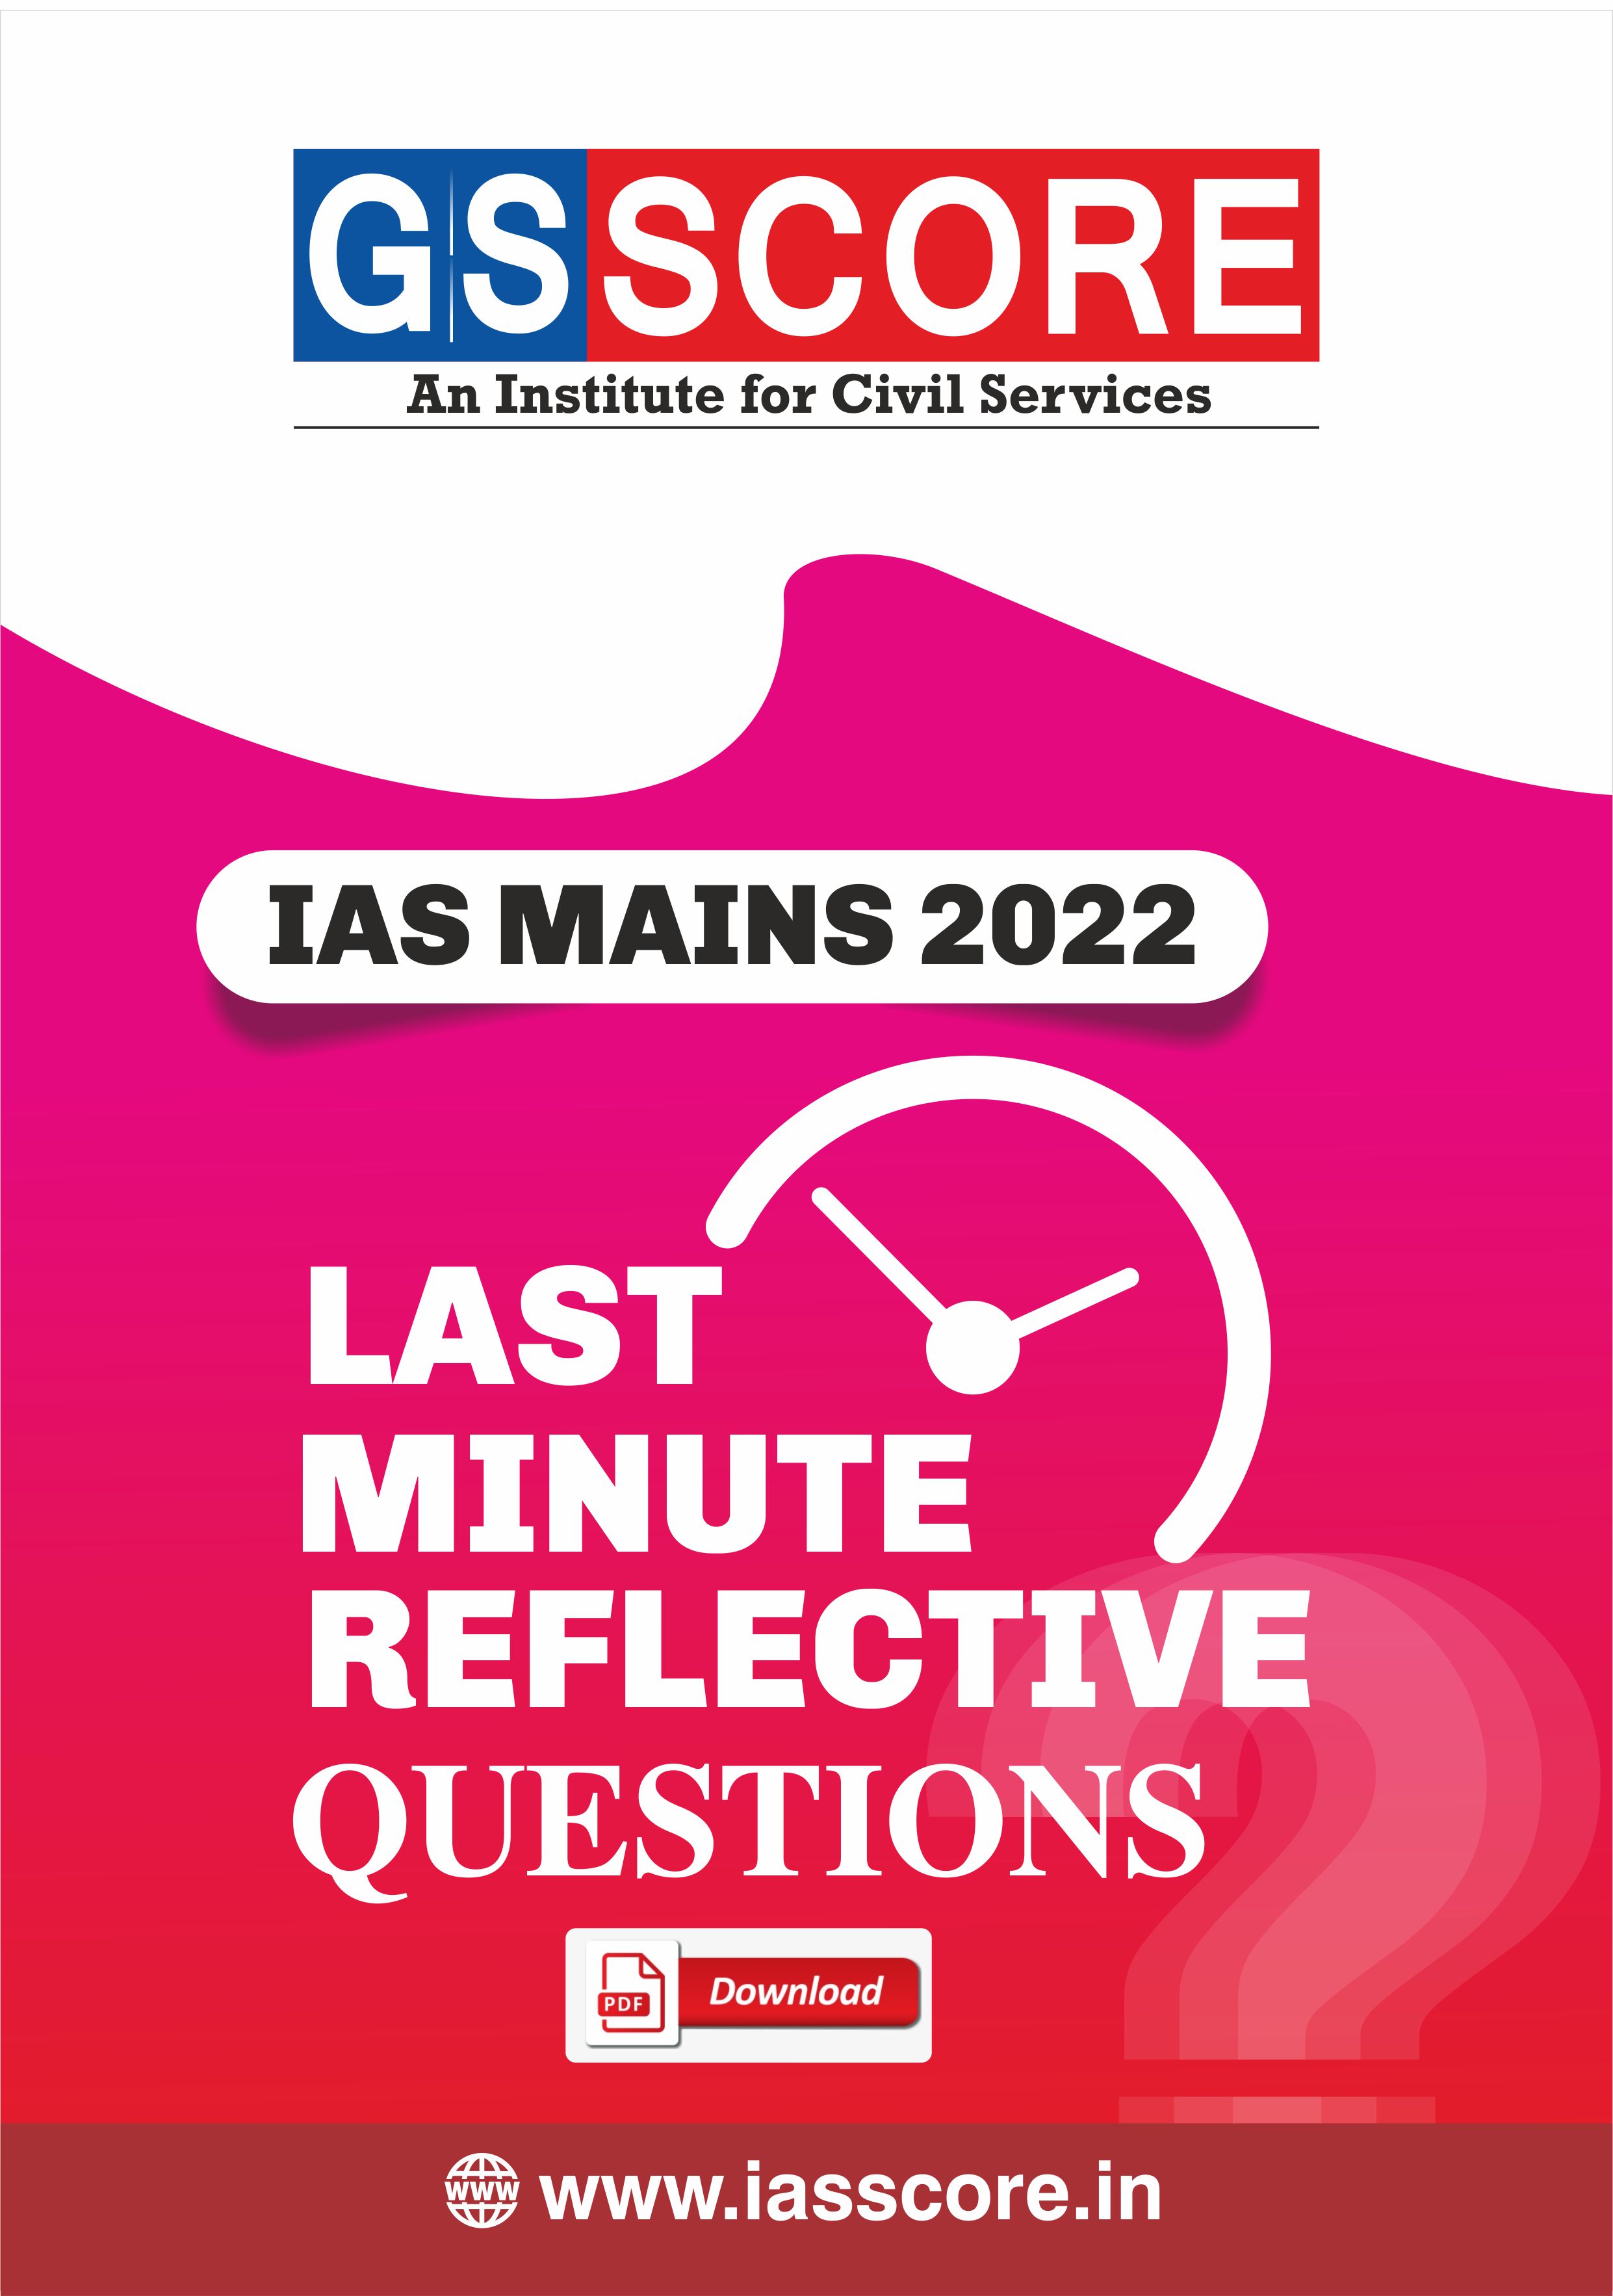 IAS Mains 2022: Last Minute Reflective Questions